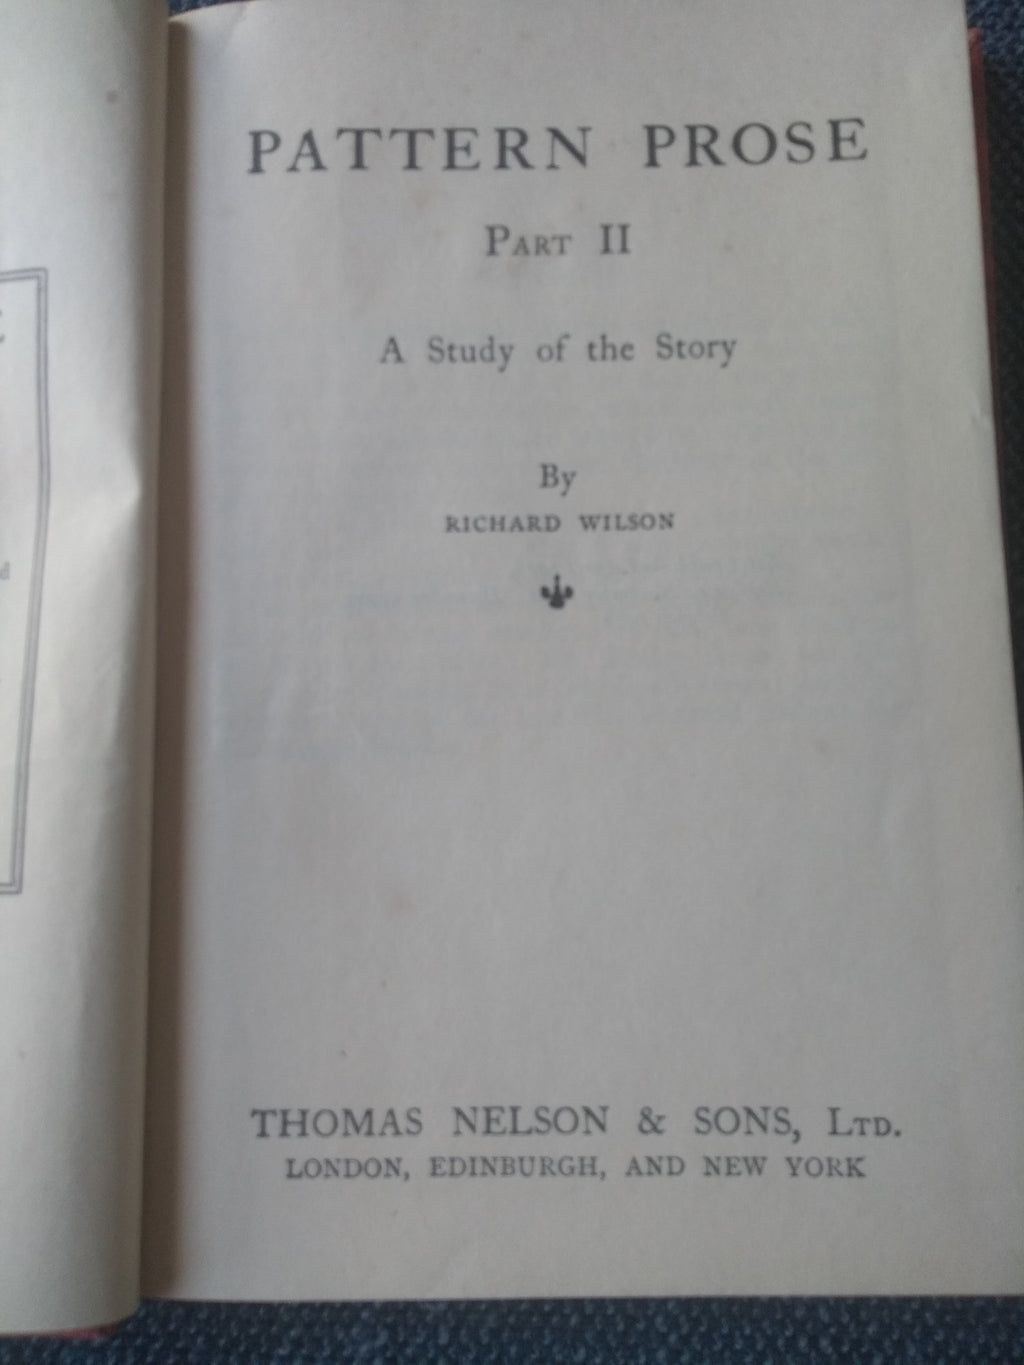 Pattern Prose Part II: A Study of the Story, by Richard Wilson